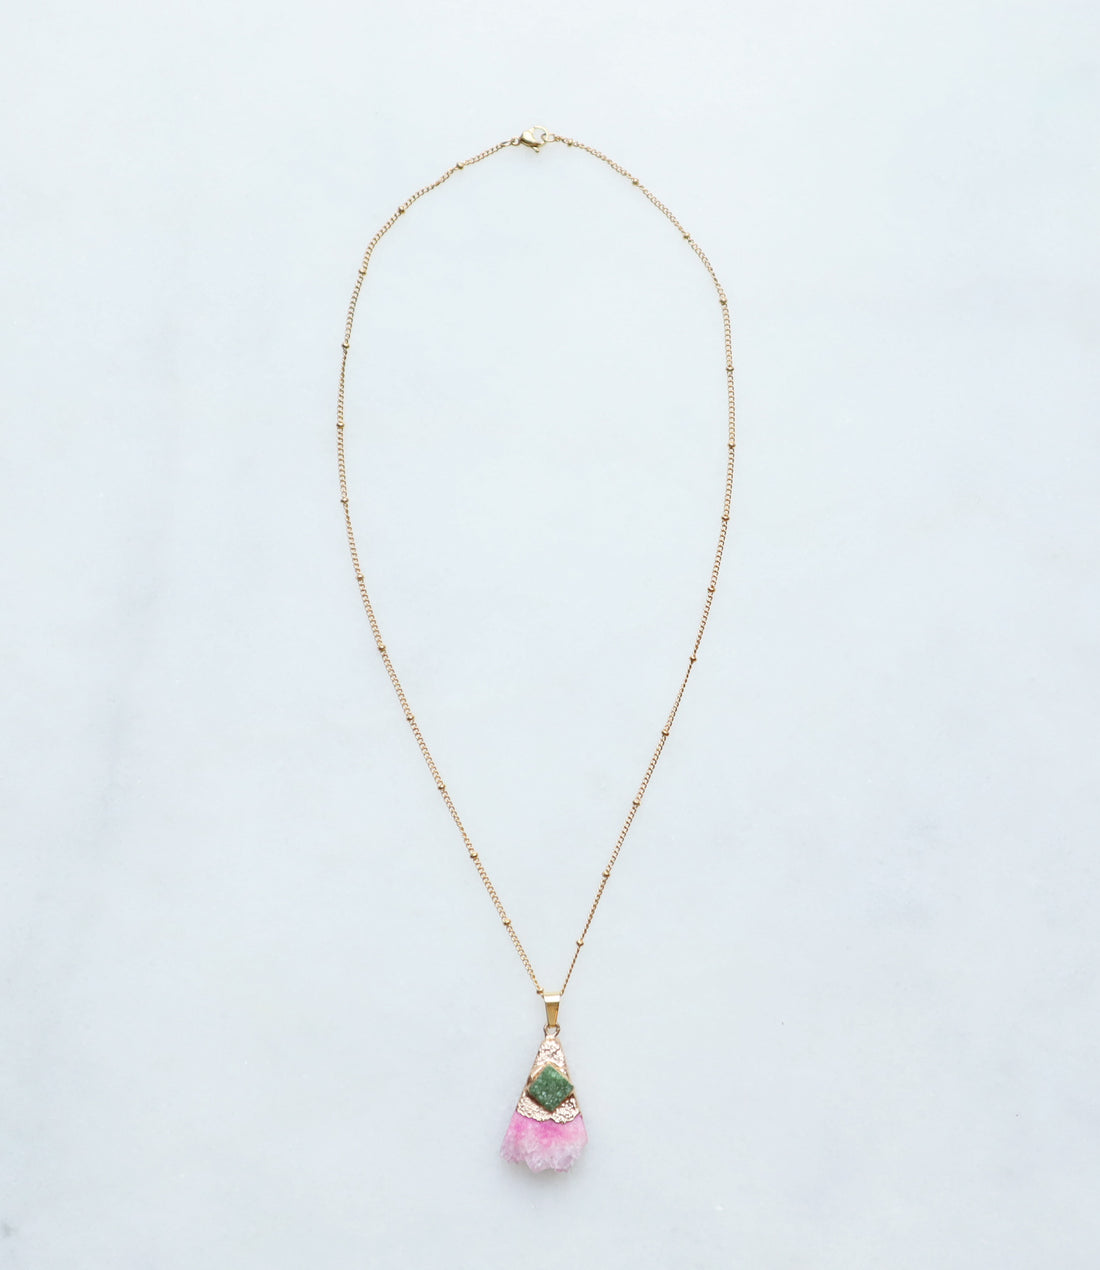 Magical Druzy Agate Necklace